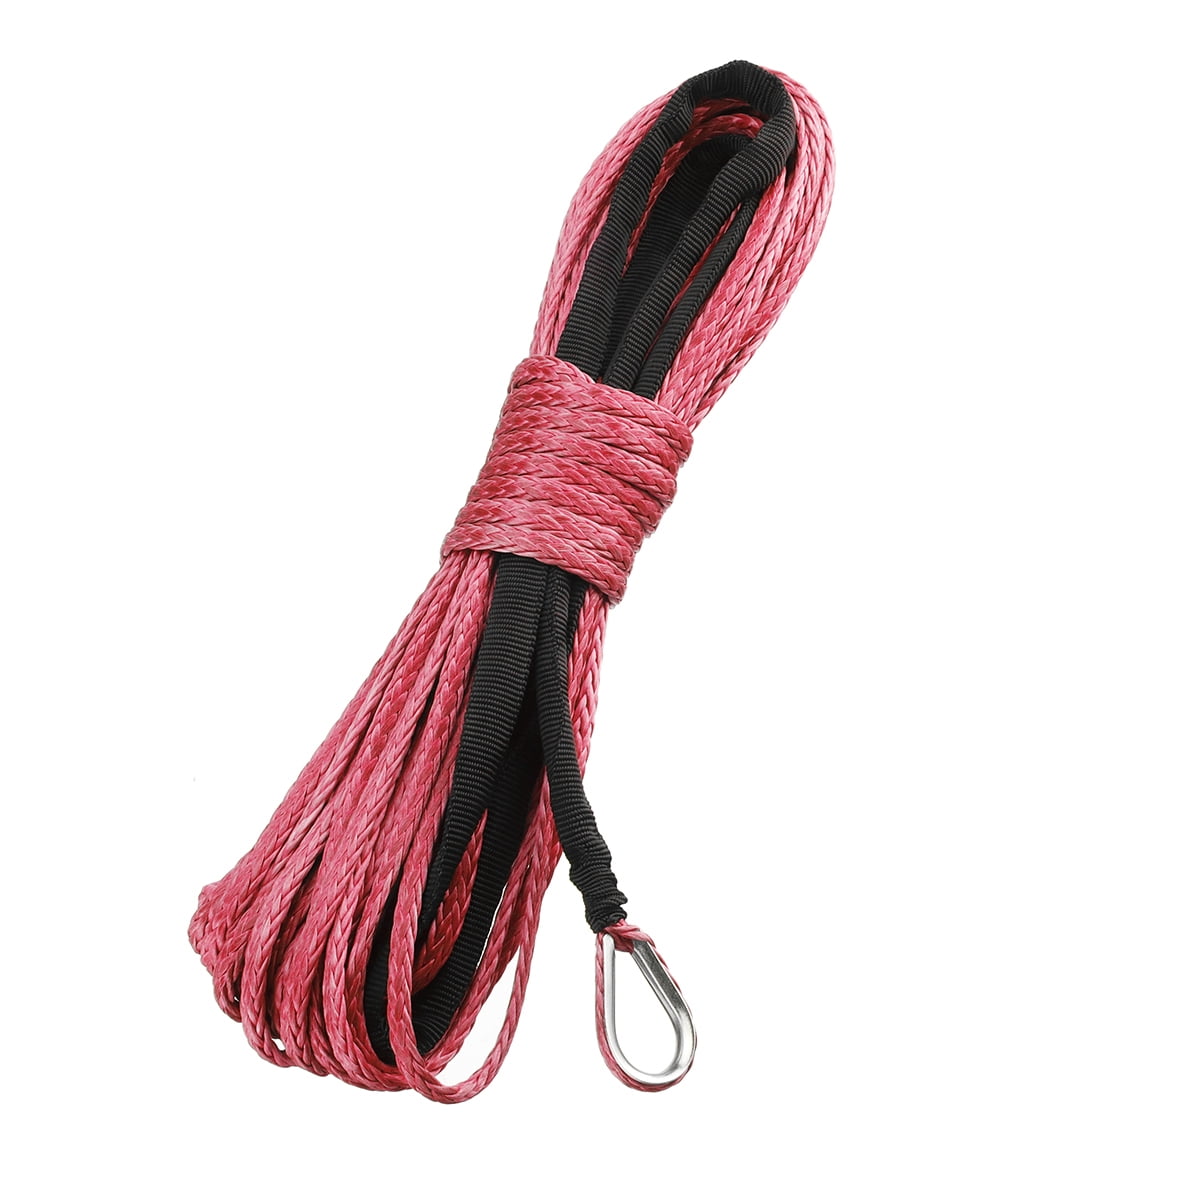 3/16'' x 50' 7700LBs Synthetic Winch Line Cable Rope W/ Sheath For Car ATV UTV 